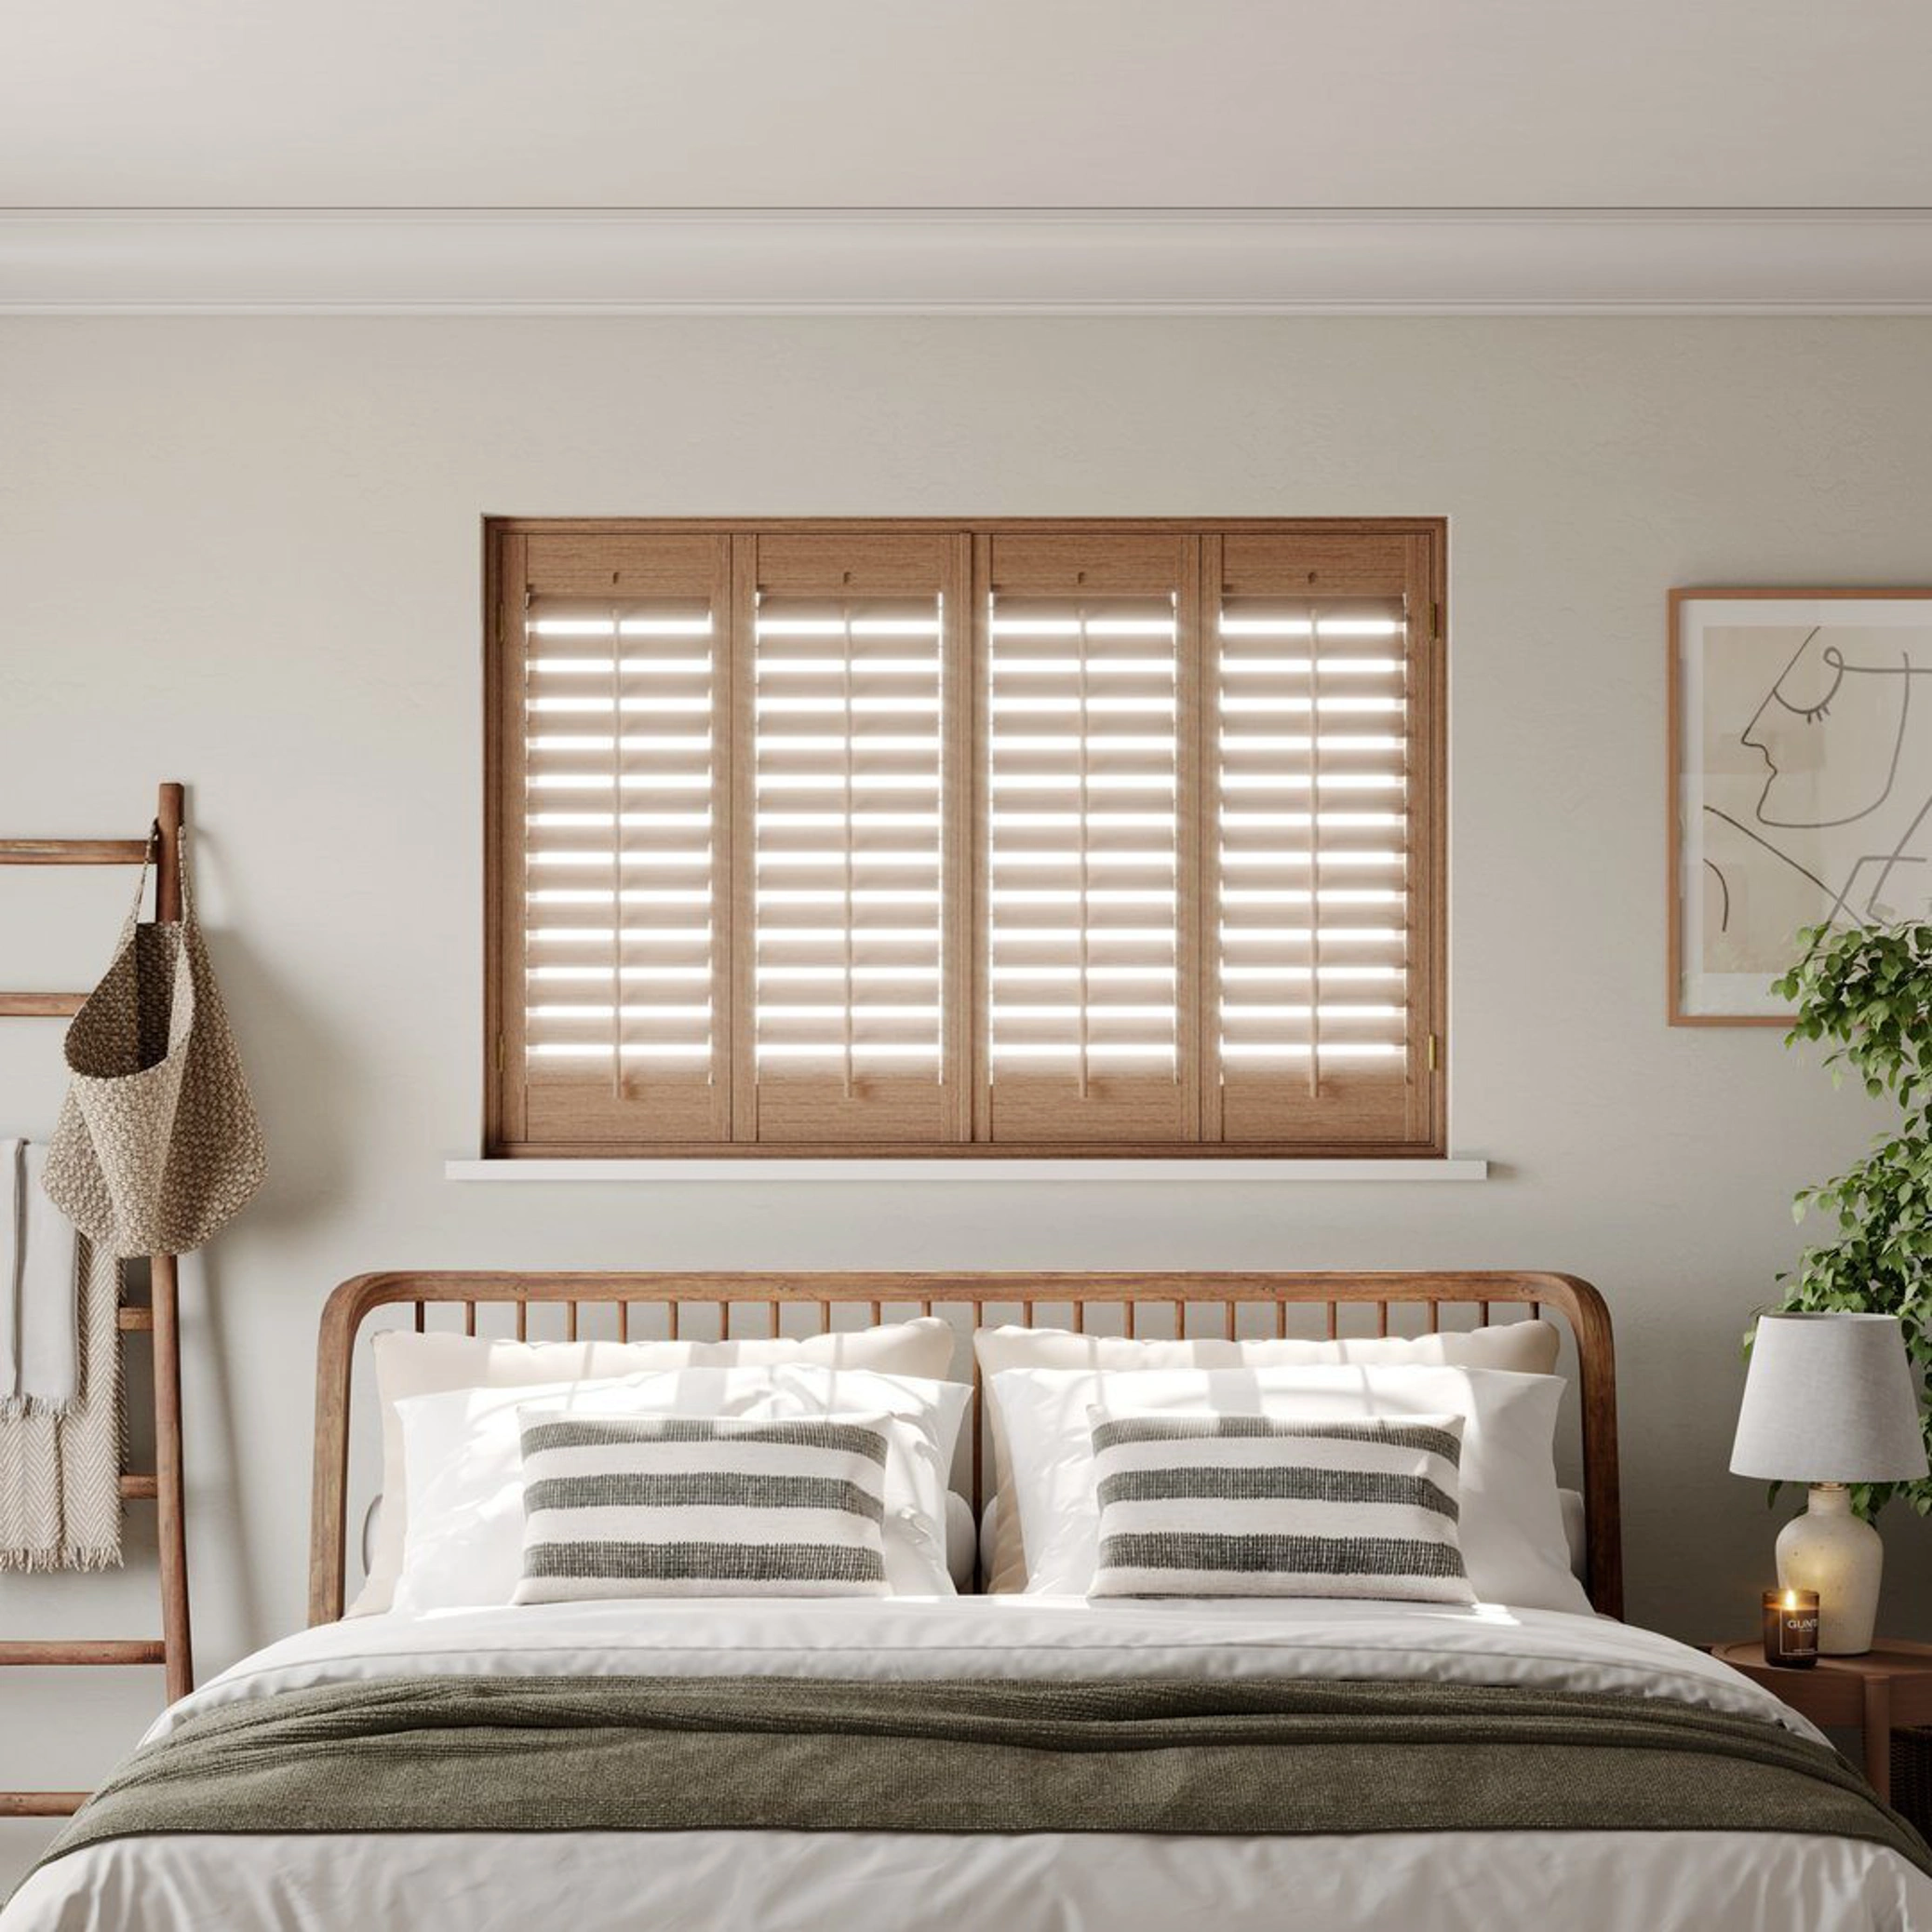 A modern neutral bedroom with Honey Stained full height wooden shutters